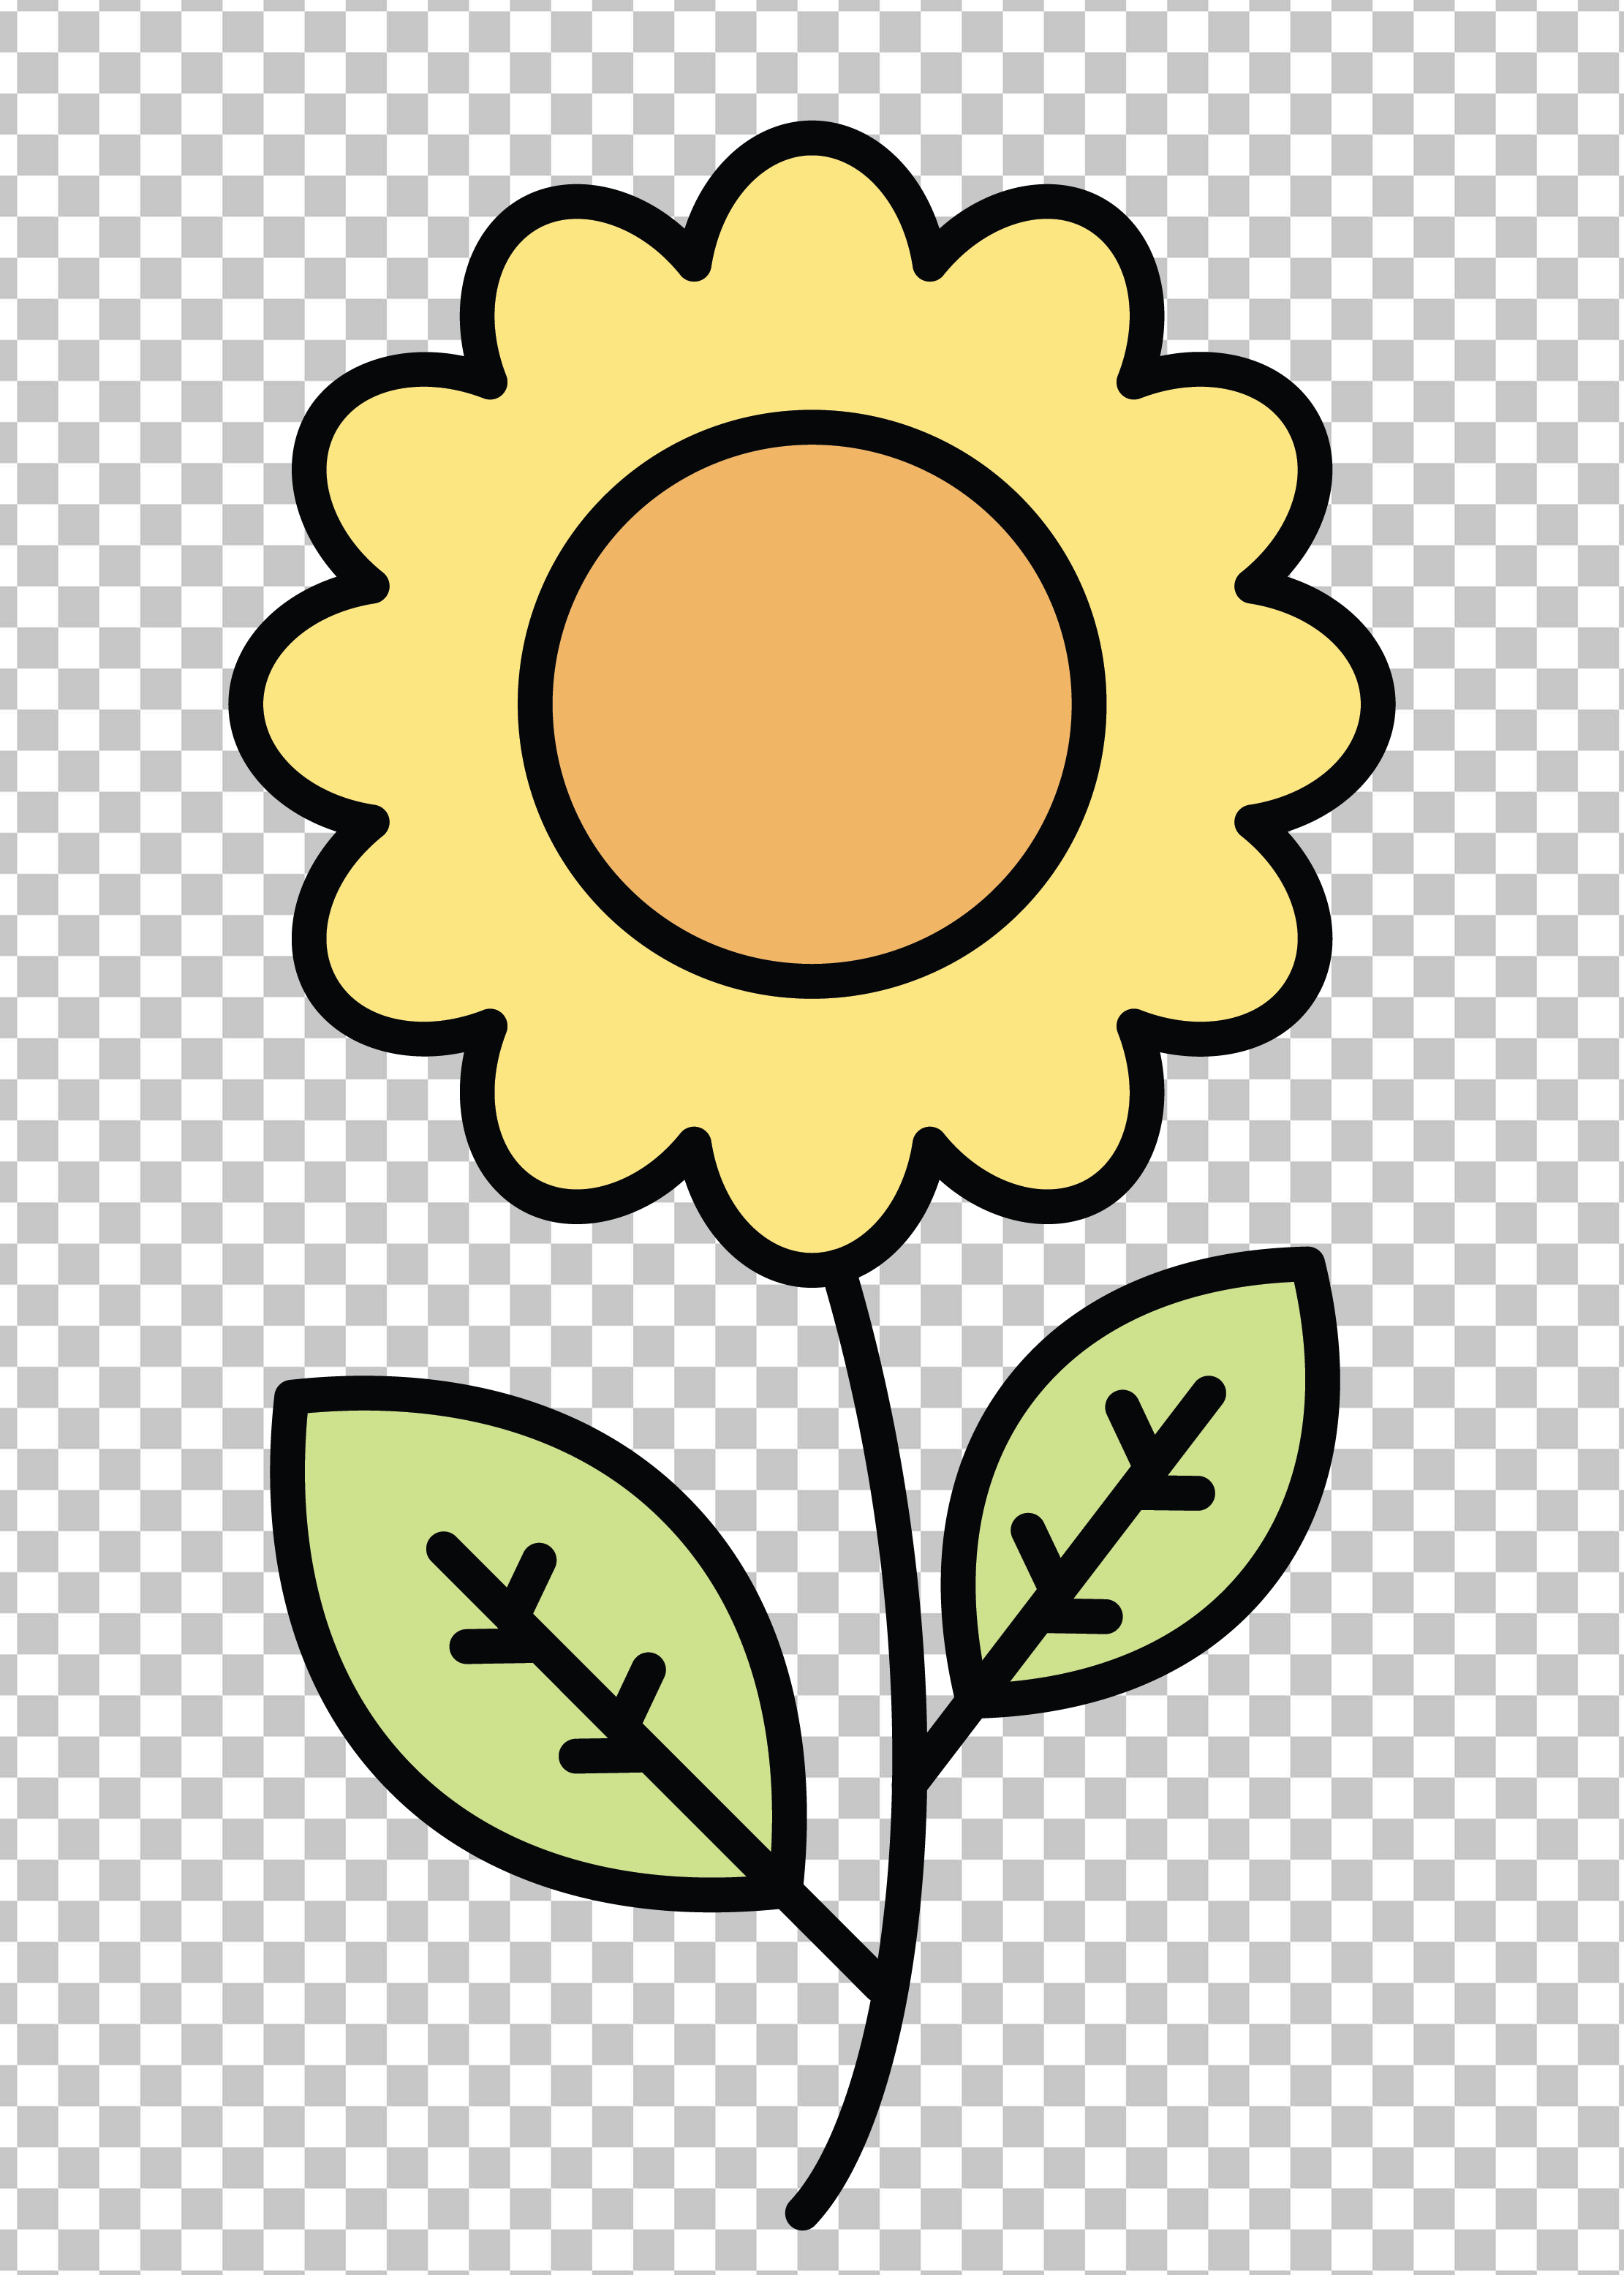 Yellow sunflower with leaves on transparent background